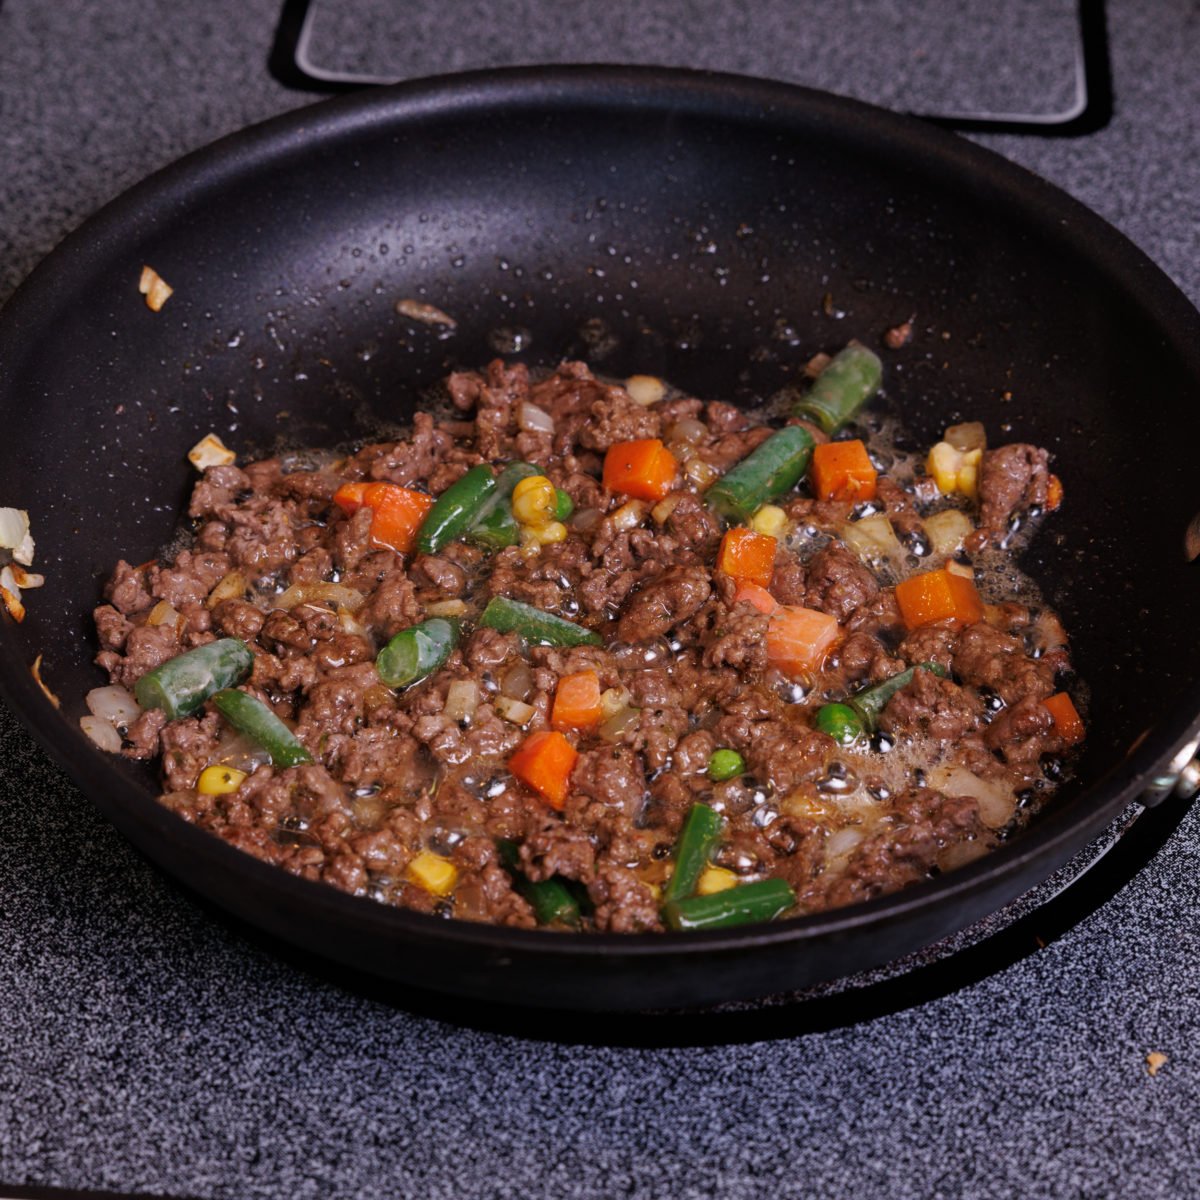 minced lamb and vegetables in a black skillet.